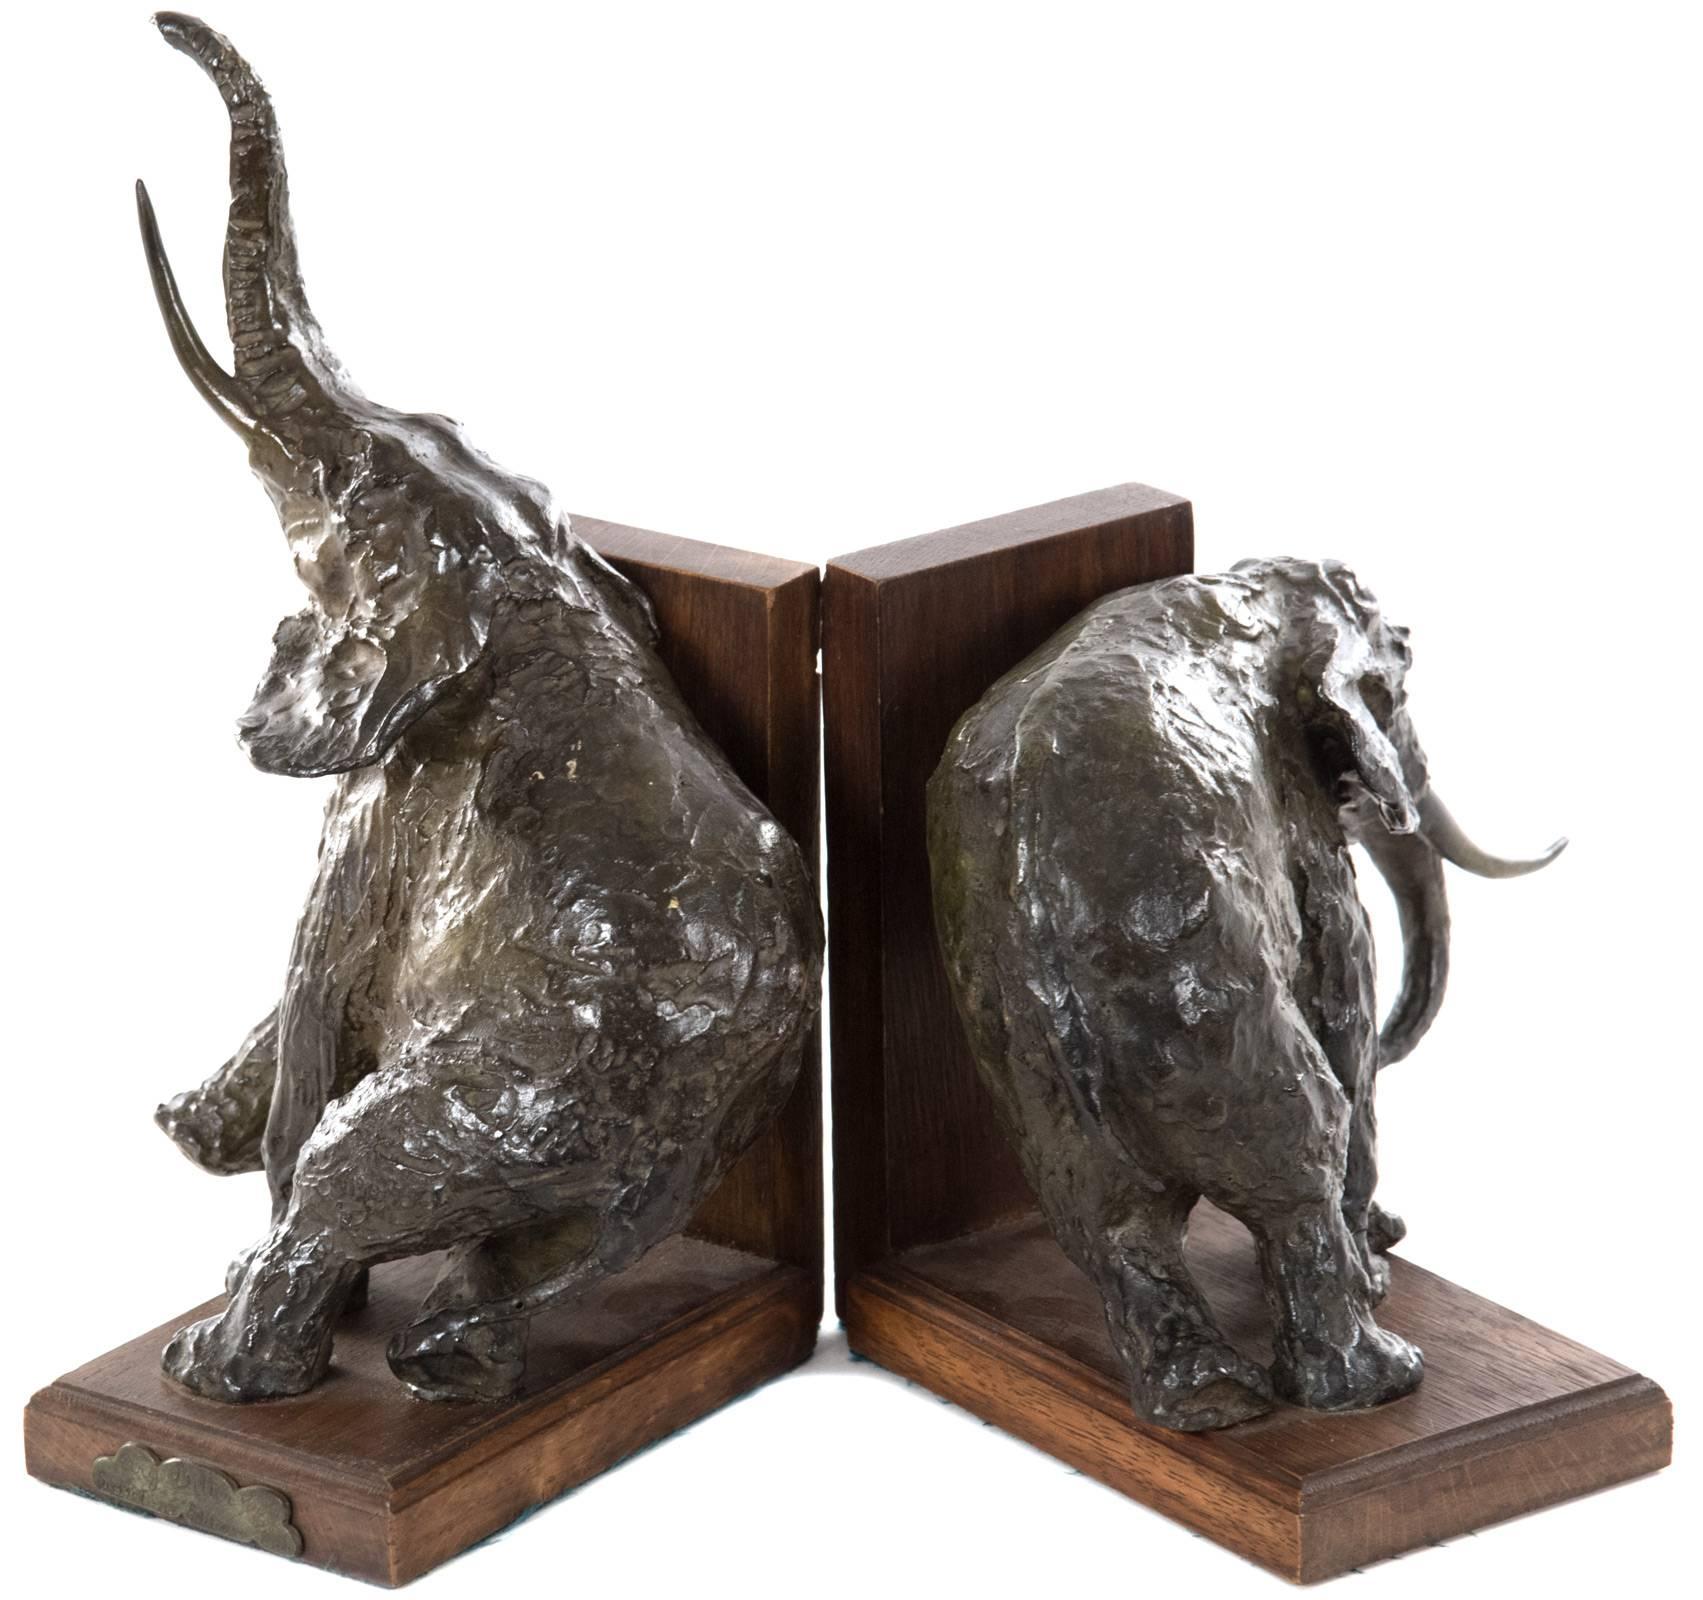 A pair of bronze elephant bookends with brown patina mounted on wooden stands by French sculptor Ary Bitter. Engraved “Ary Bitter Sclp Susse Fres Edrs Paris” on bronze plaque on one base. 
Ary Jean Leon Bitter (French, 1883–1973) was a French